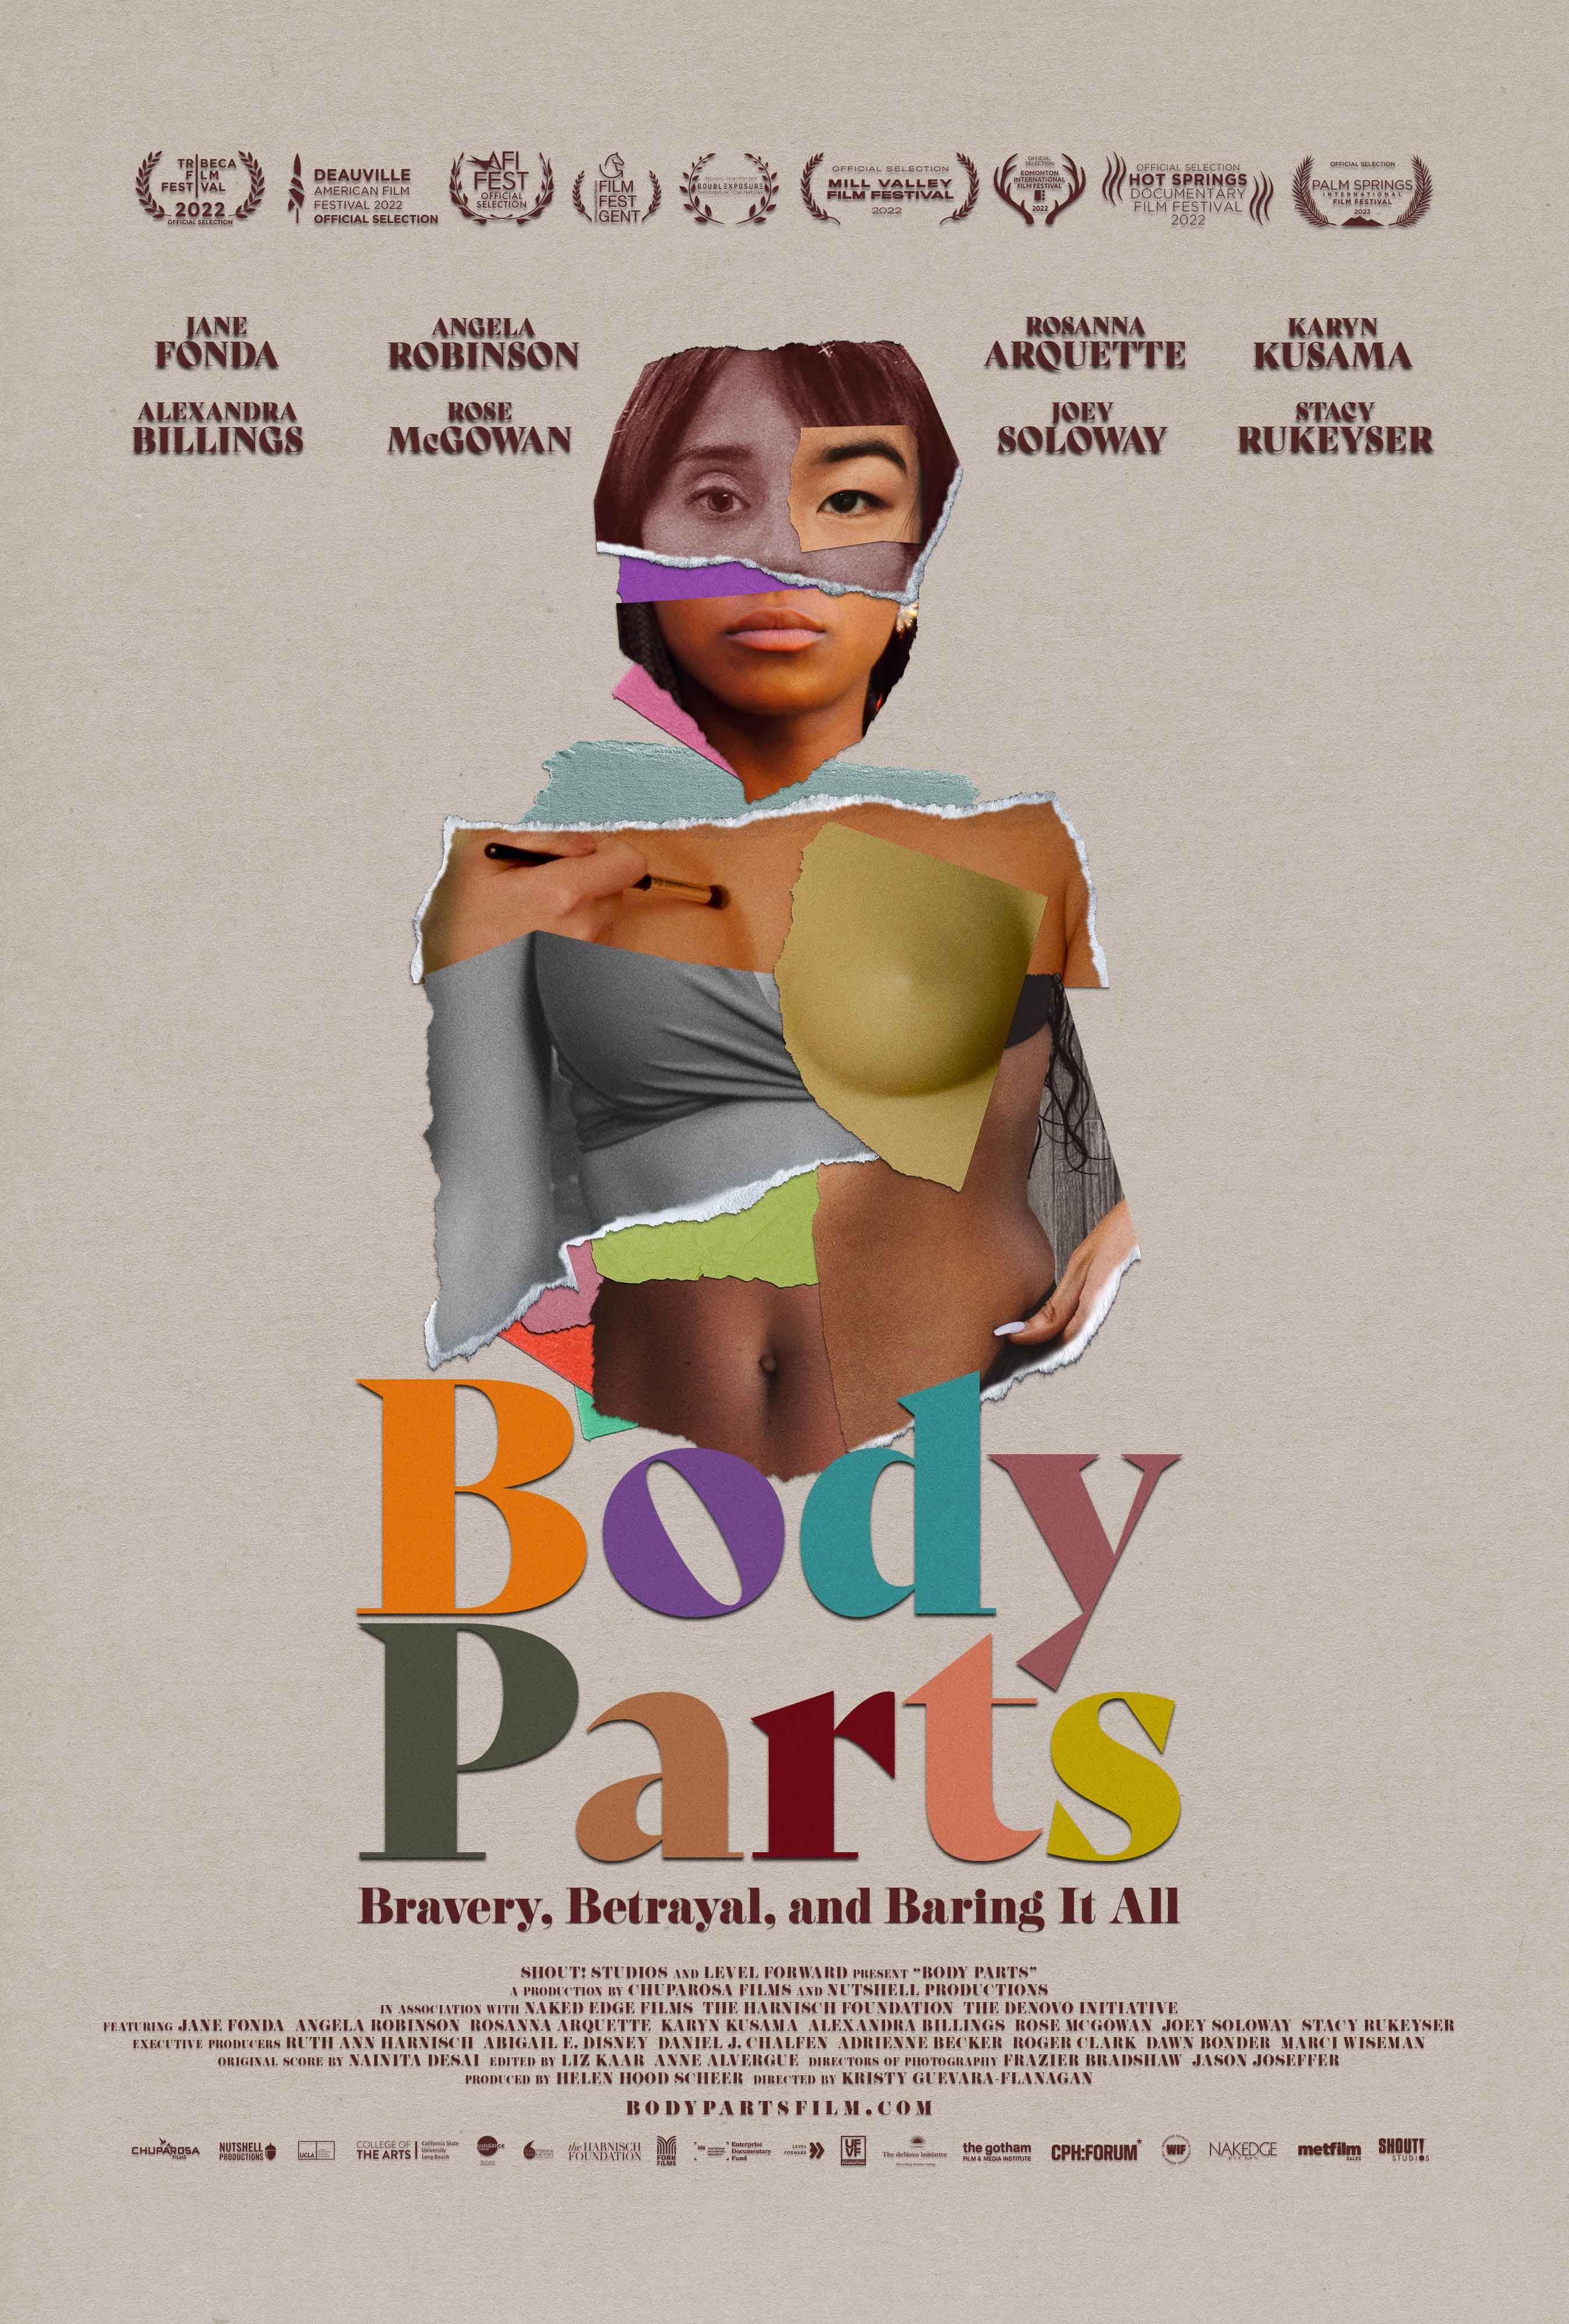 Body Parts movie poster, a collage of images that make up a woman's body